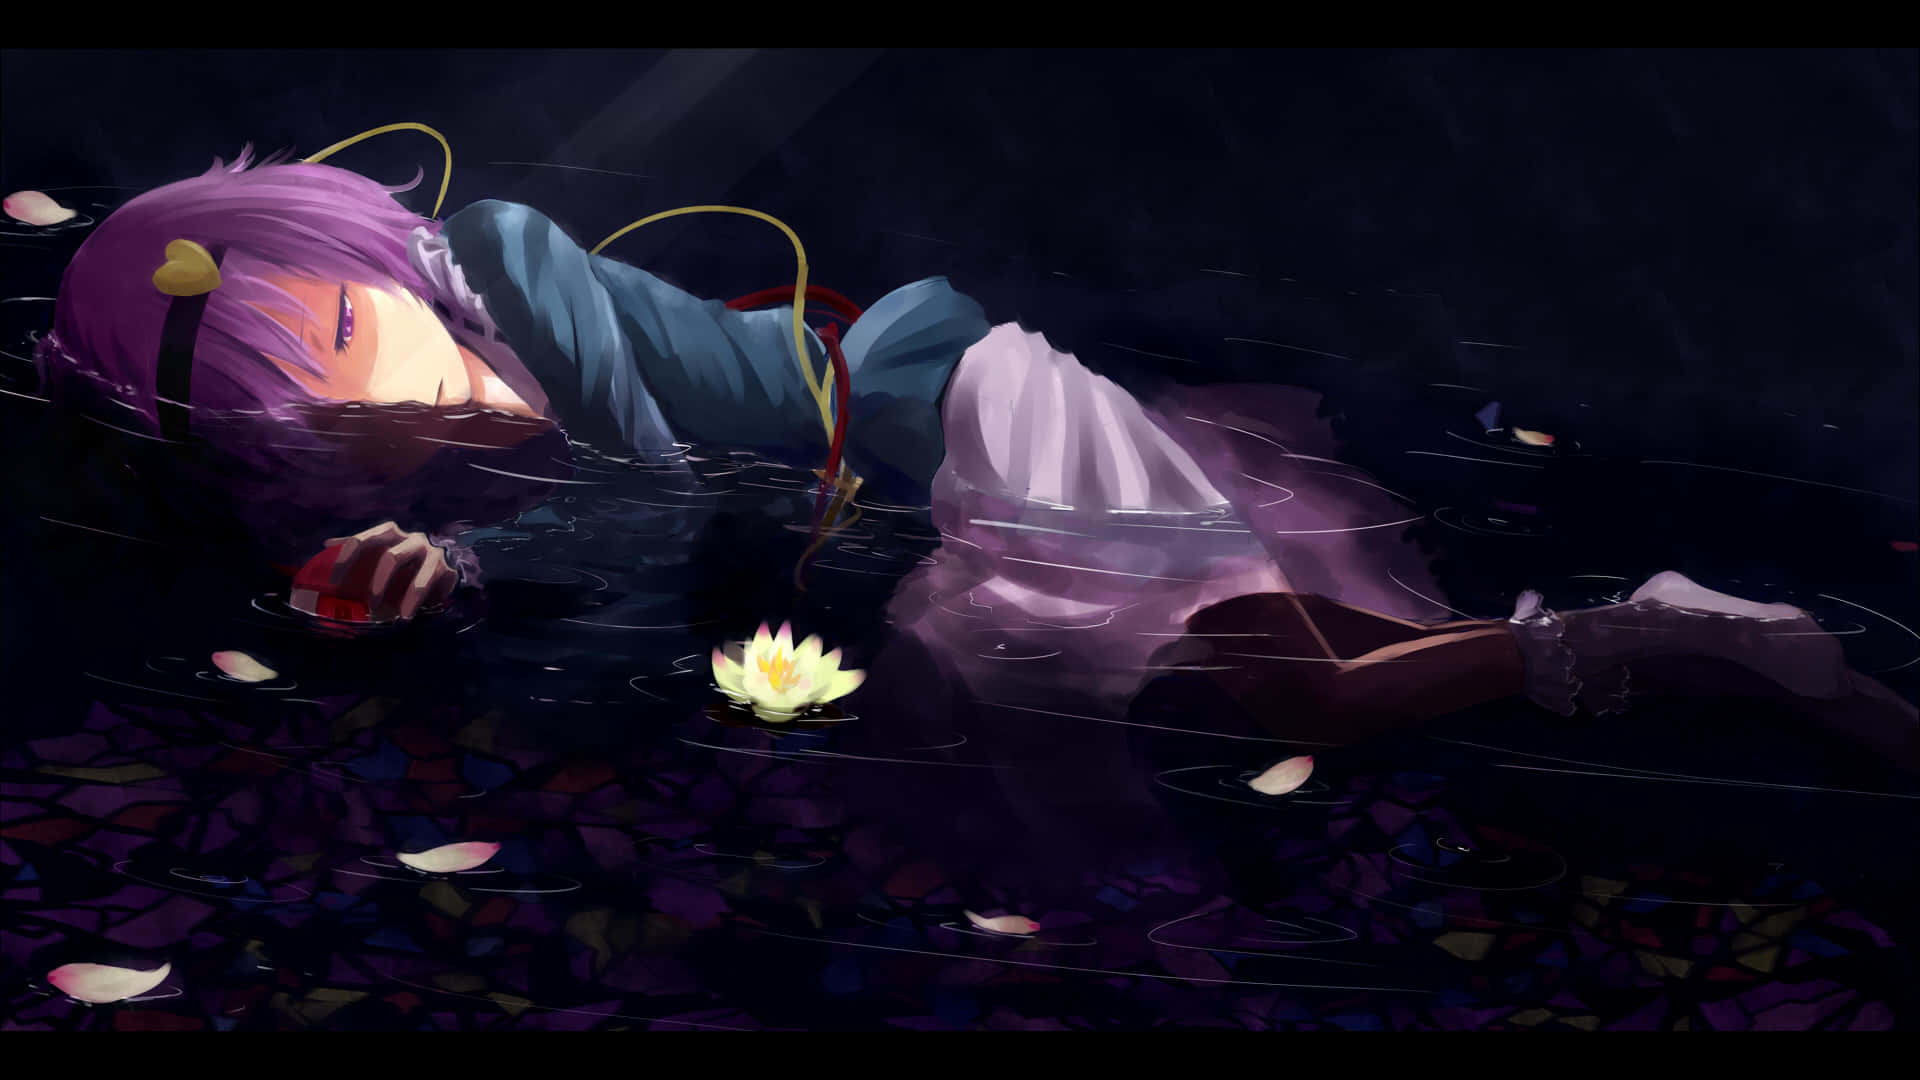 Sad Crying Anime Girl In The River Wallpaper